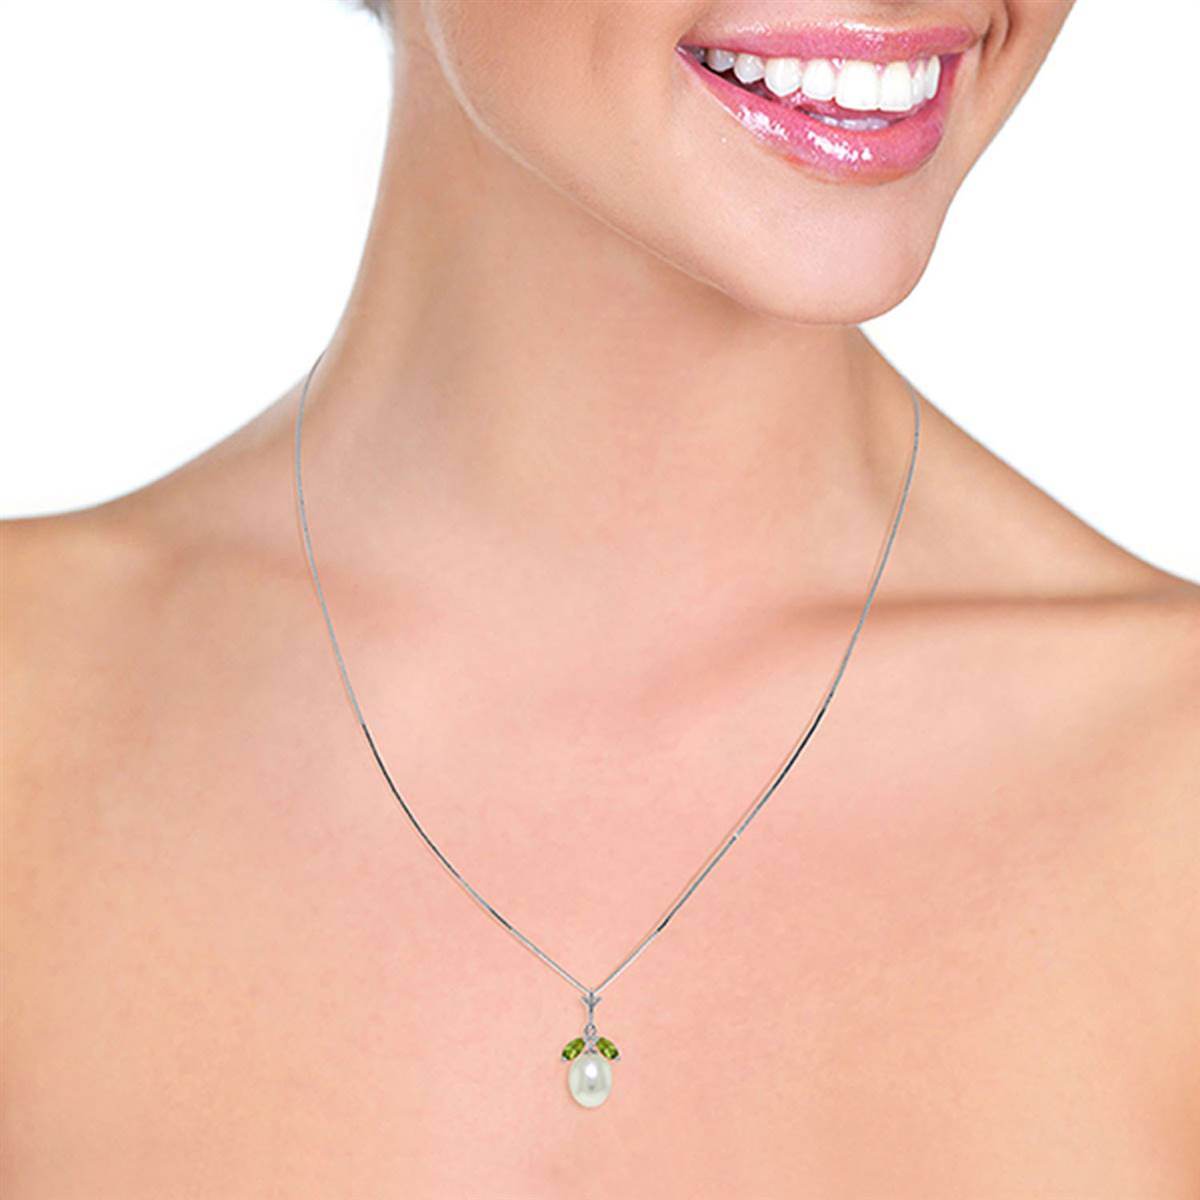 4.5 Carat 14K Solid White Gold Here Is Hope Peridot Pearl Necklace